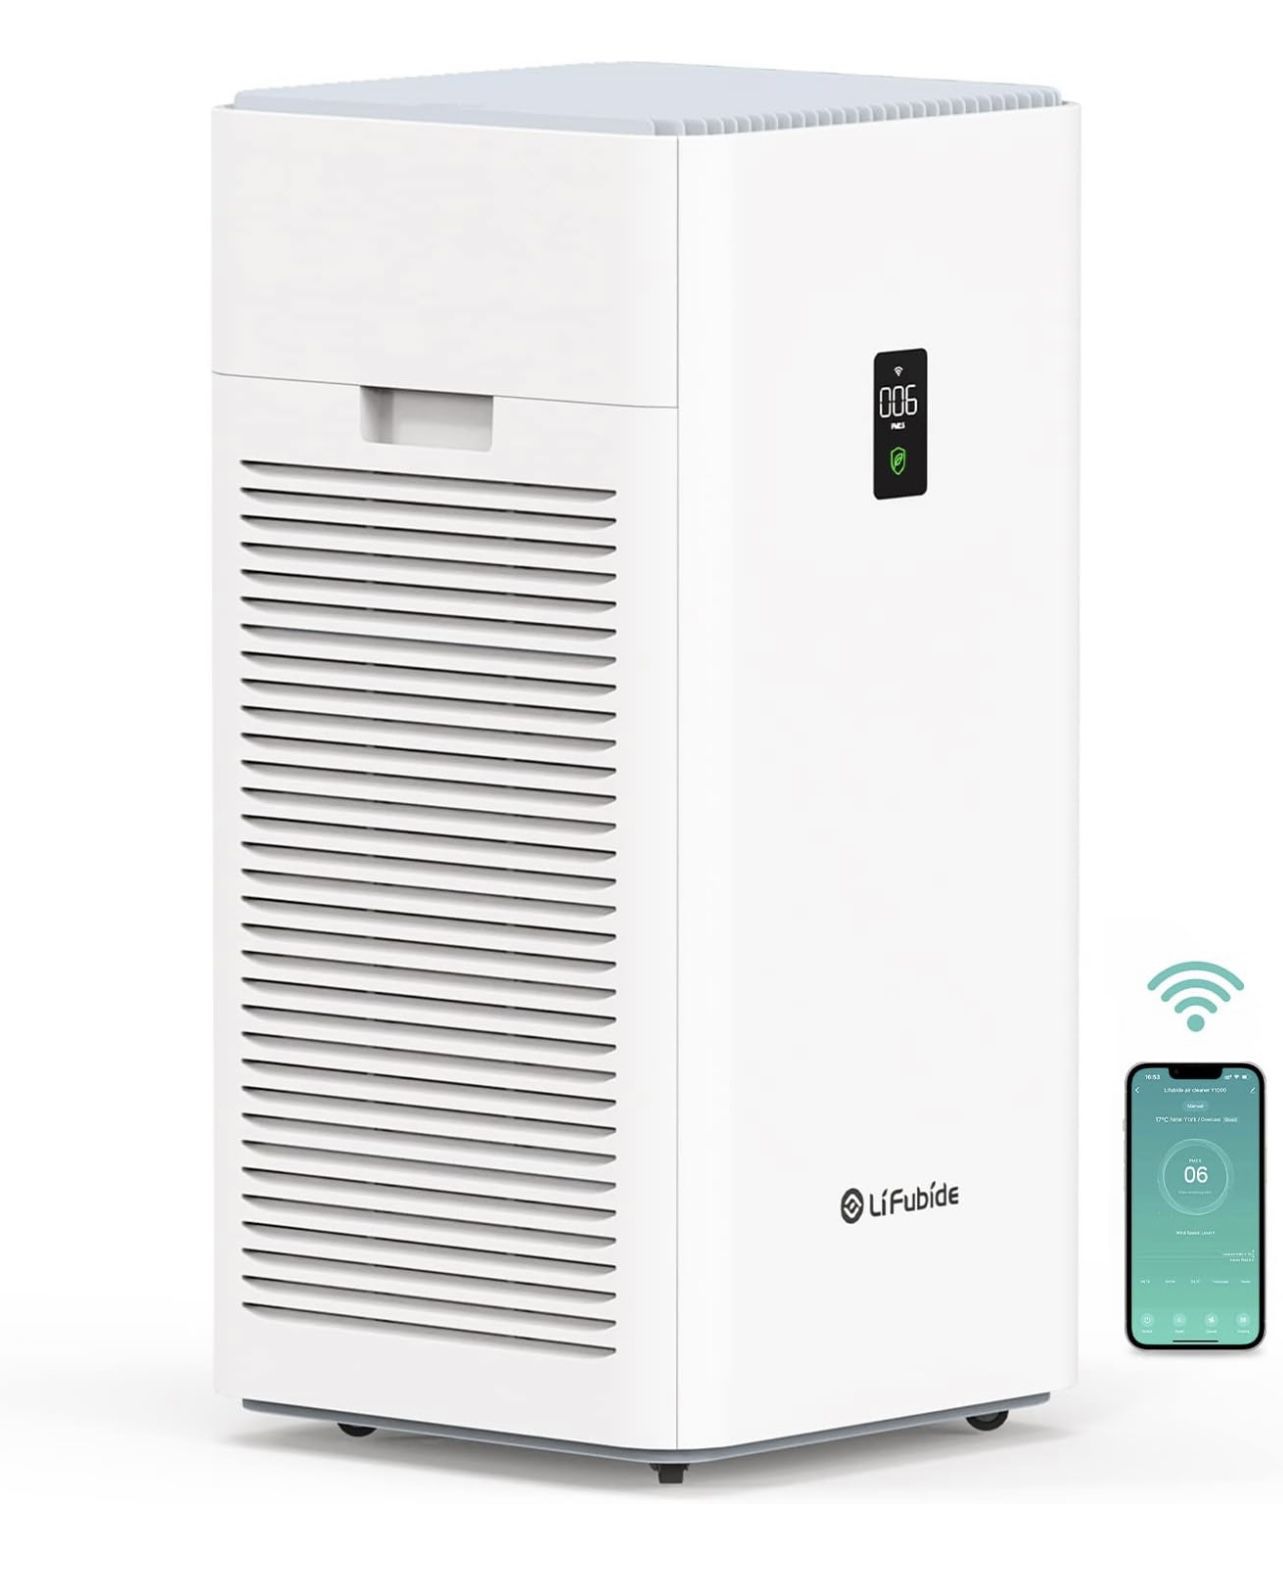 New Lifubide Large Room Air Purifier, H13 True HEPA,4555 Sq.Ft Coverage,24dB Low Noise For Bedroom,Removal Of 99.99% 0.01 Microns Particles, Pet Dande